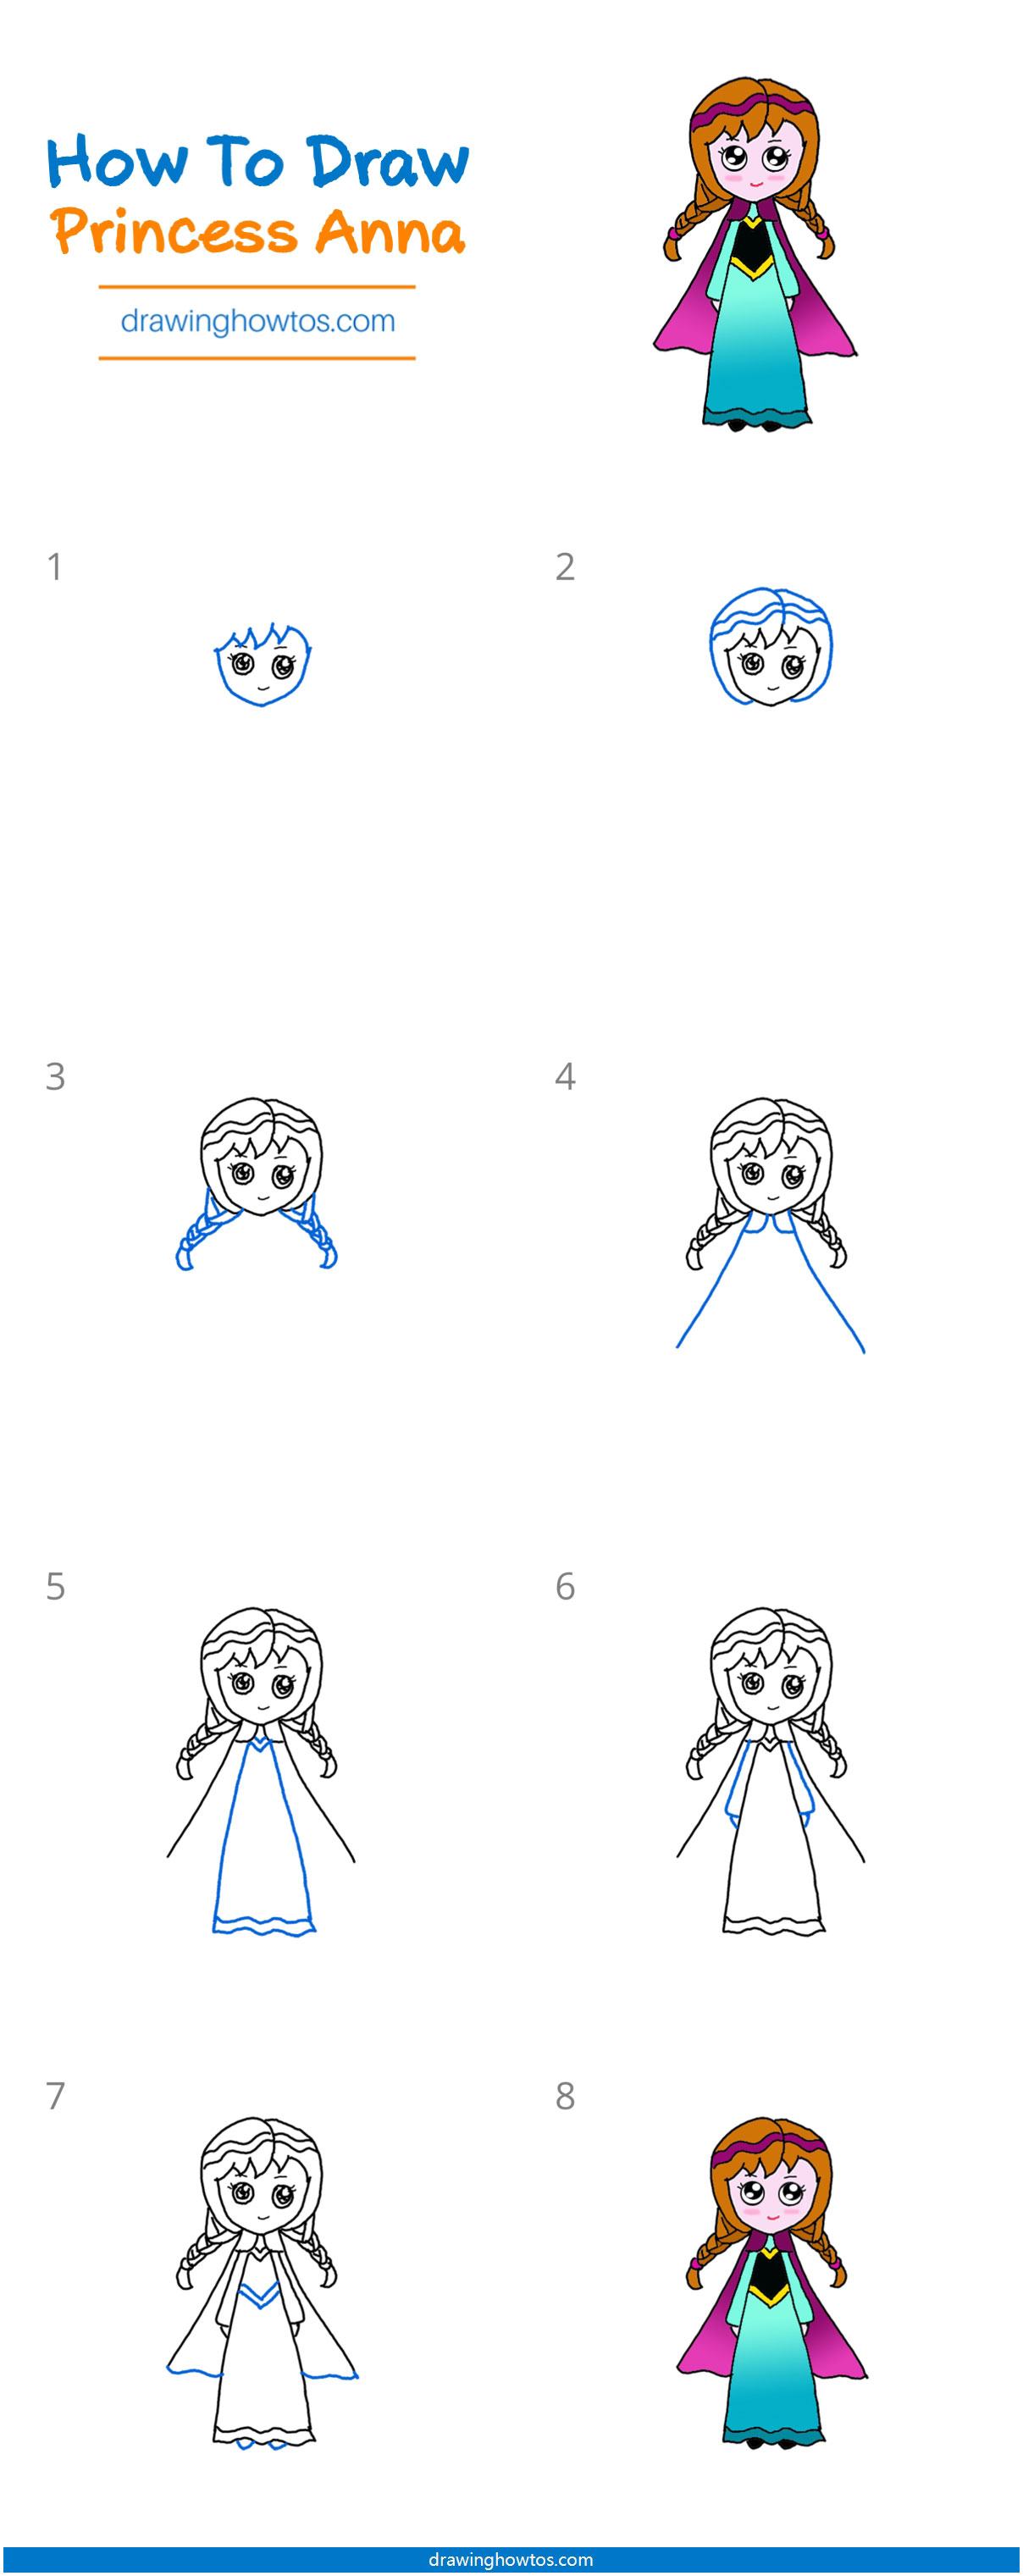 How to Draw Princess Anna - Step by Step Easy Drawing Guides - Drawing